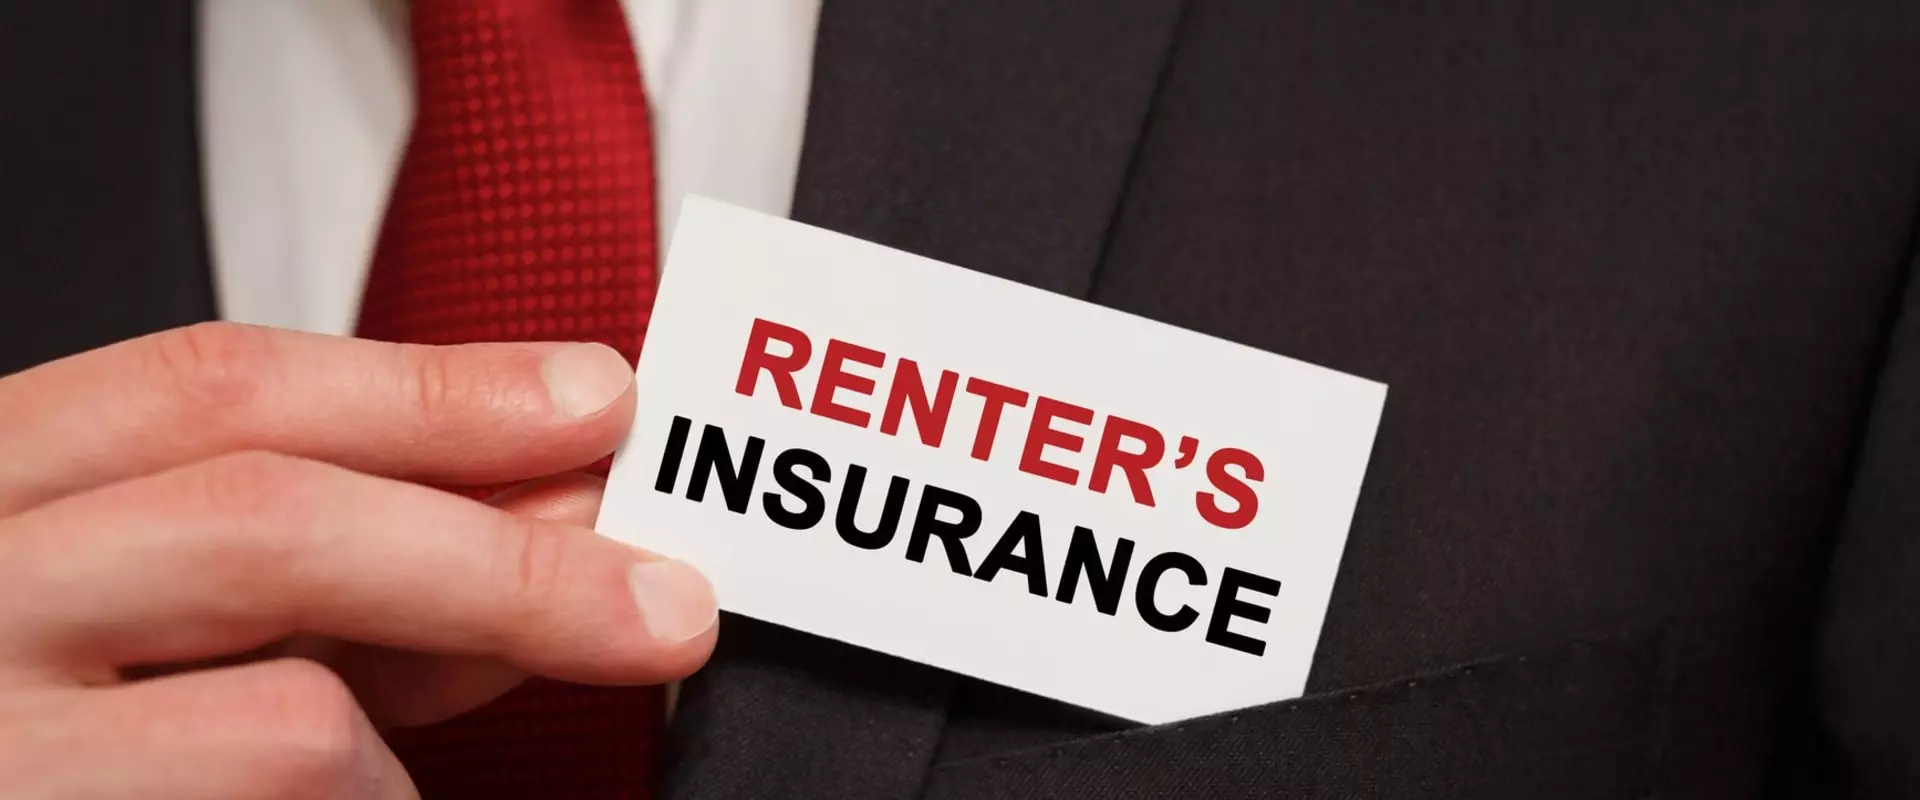 How does renter’s insurance work?